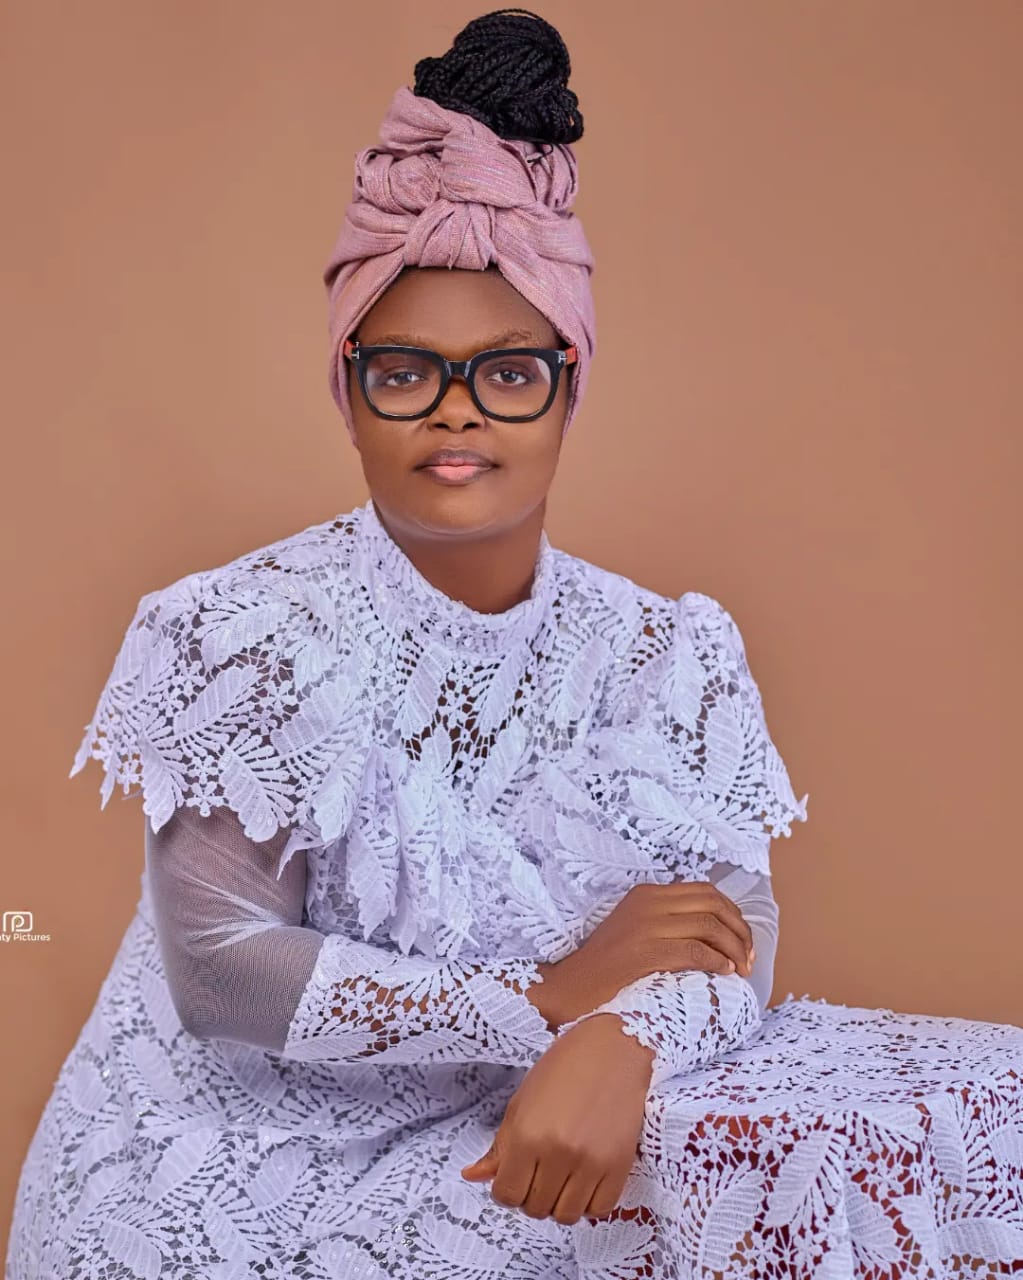 Popular Lagos Gospel Musician, Tosin Oni Celebrate Birthday In Grand Style As Publisher BethNews Madia Extols Her Sterling Virtues